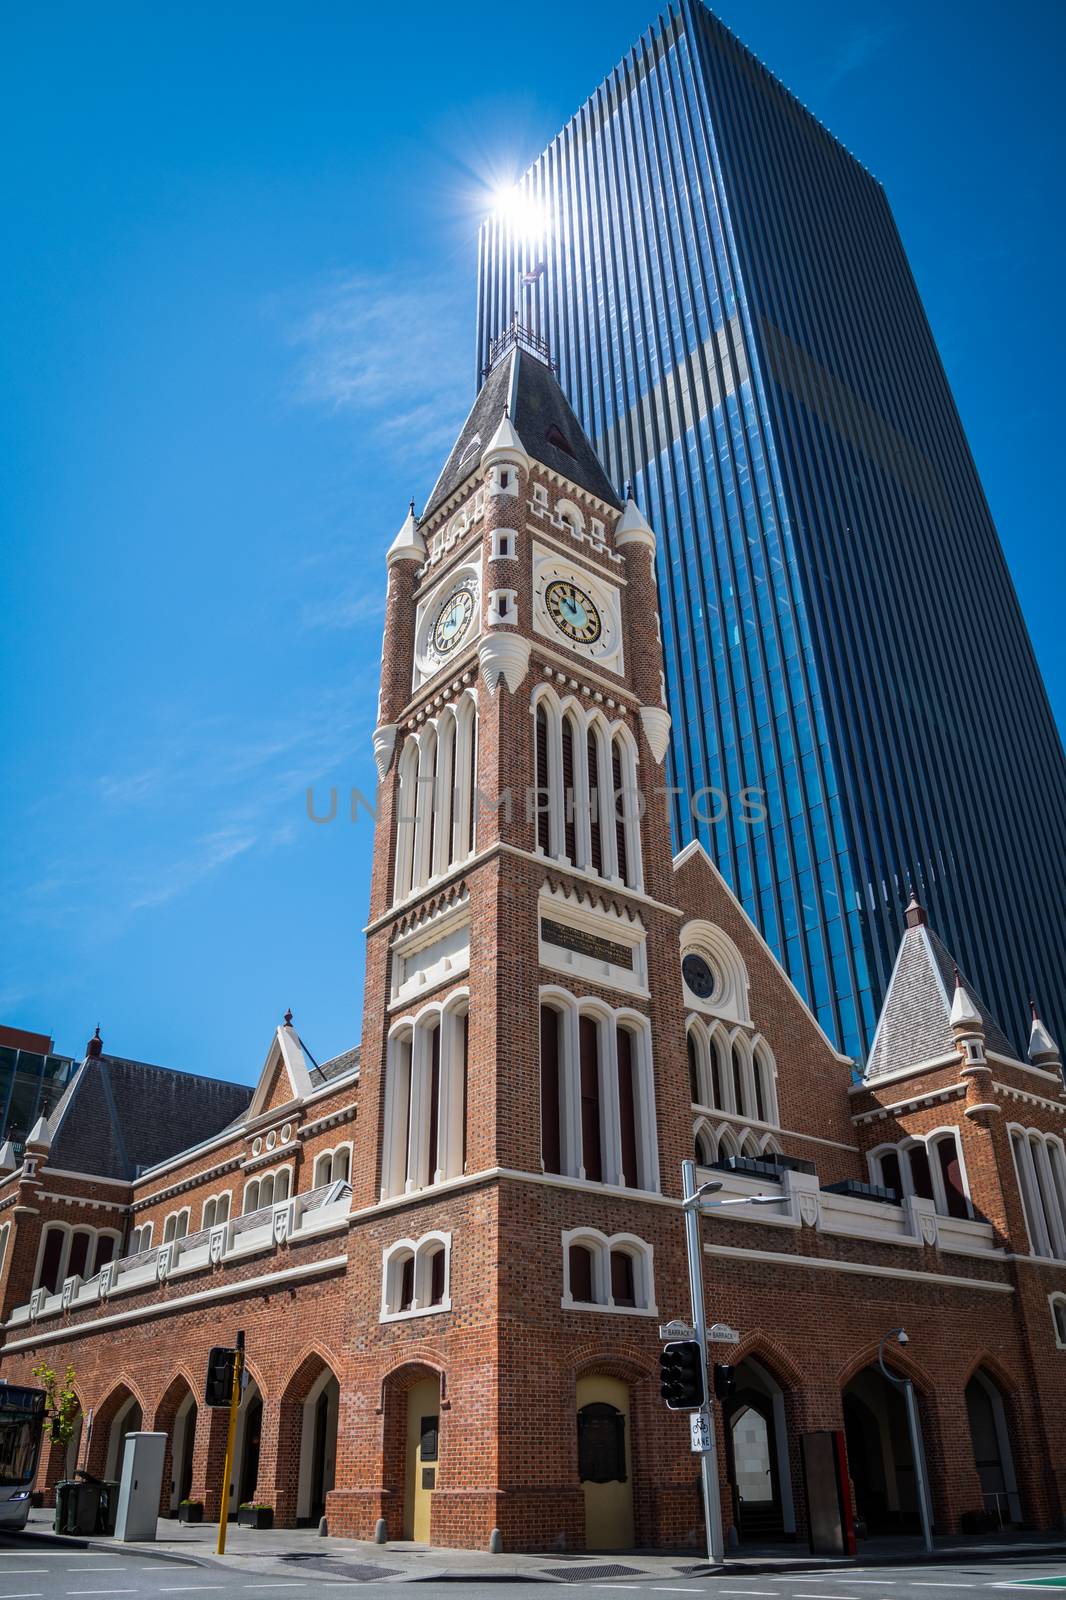 Perth Town Hall in Western Australia old brick building in front of modern skyscrapers